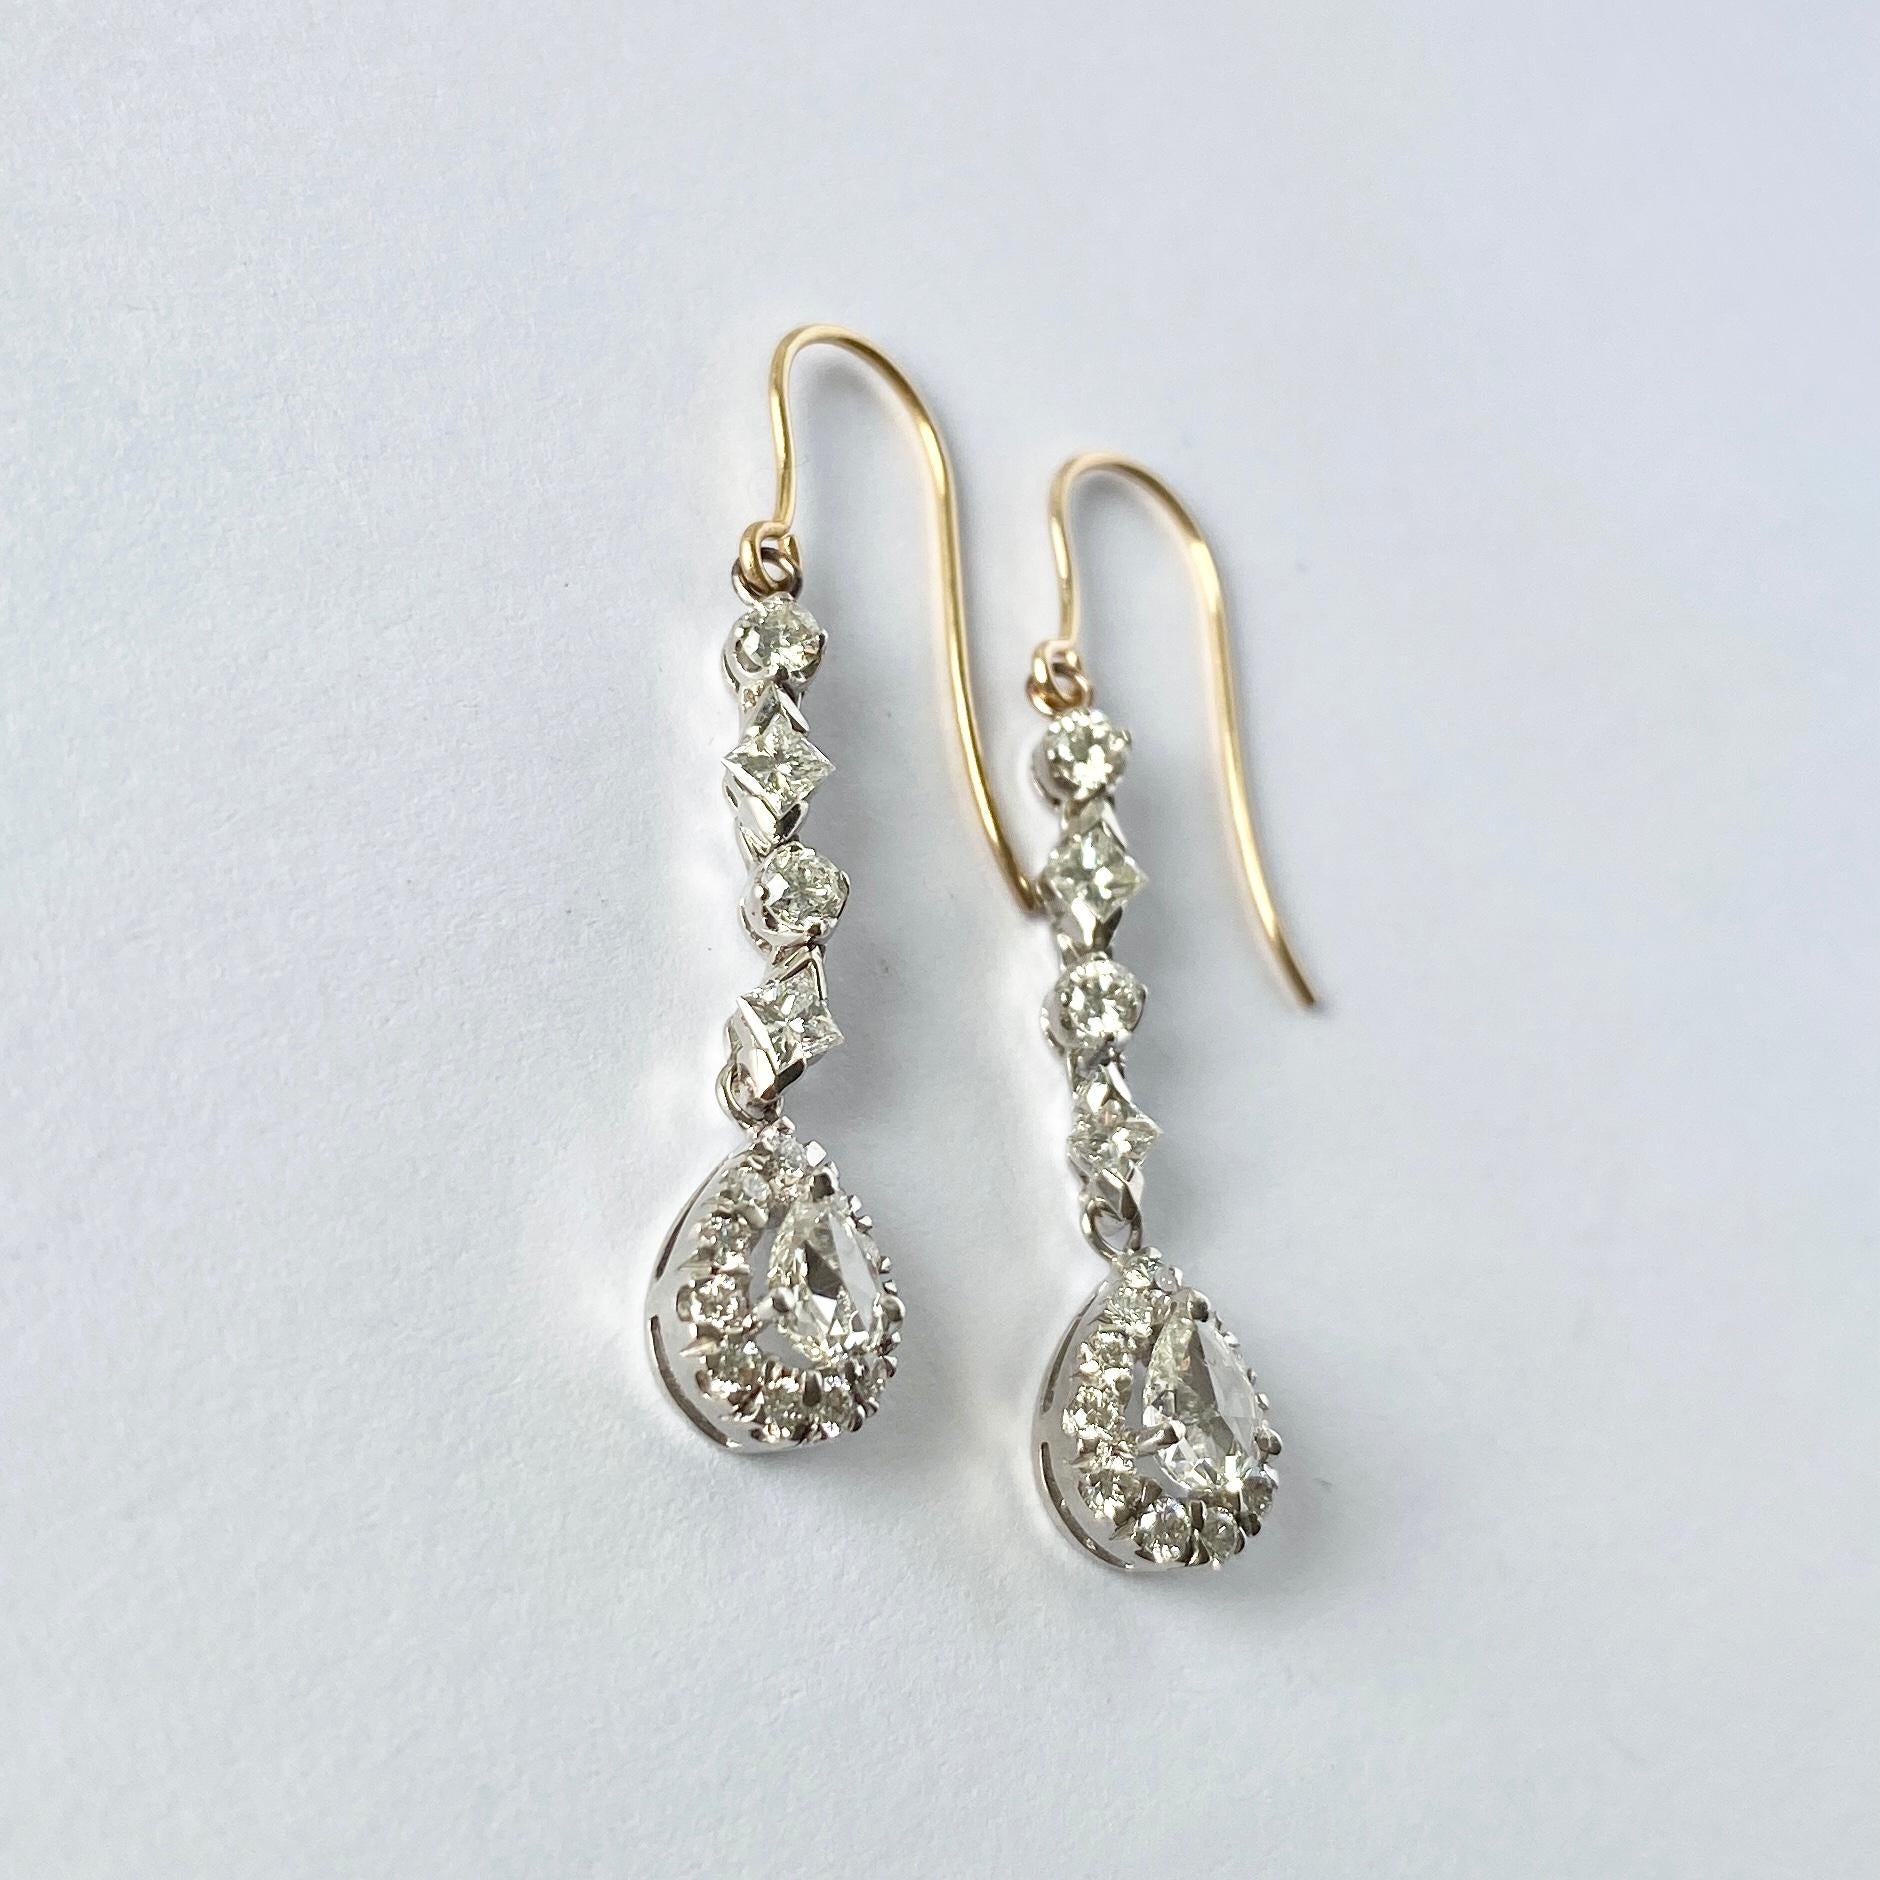 Vintage Diamond and Platinum Drop Earrings In Excellent Condition For Sale In Chipping Campden, GB